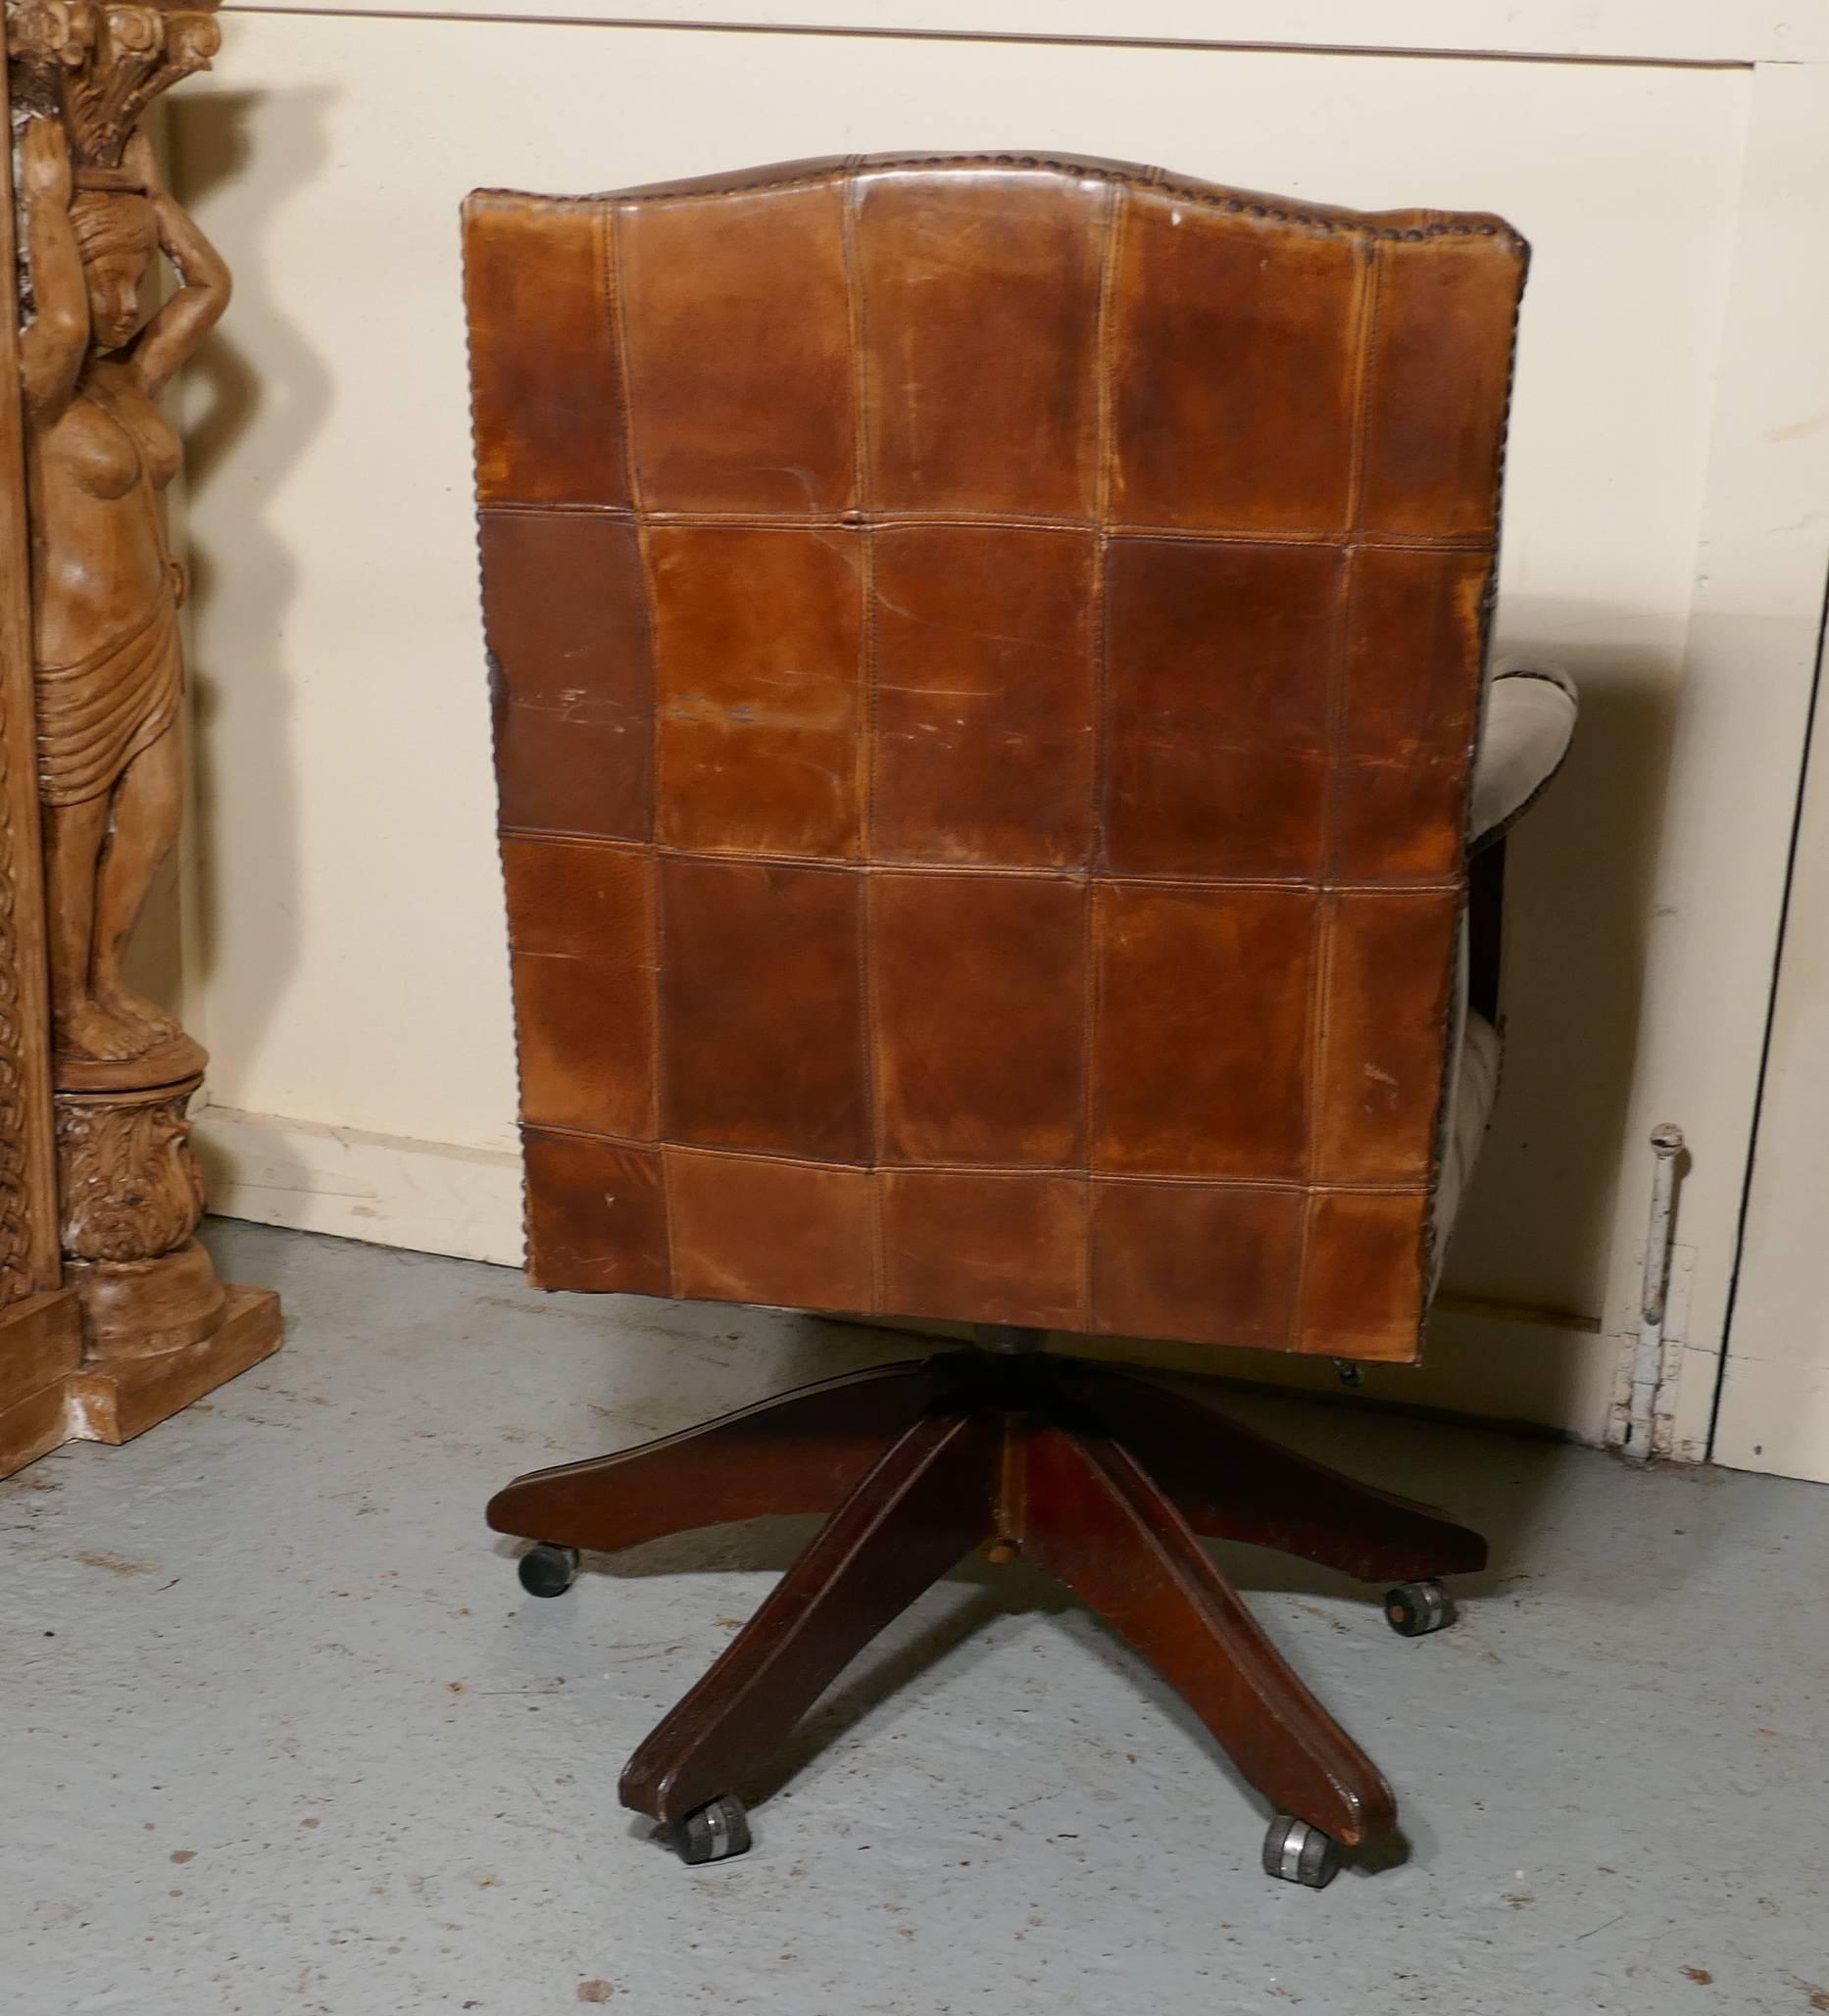 Chesterfield leather library or office desk chair

This is a wonderfully comfortable desk chair, the high back of the chair is covered in deeply buttoned Brown leather with brass studs, as is the seat and arms
The arm fronts have carved roundels